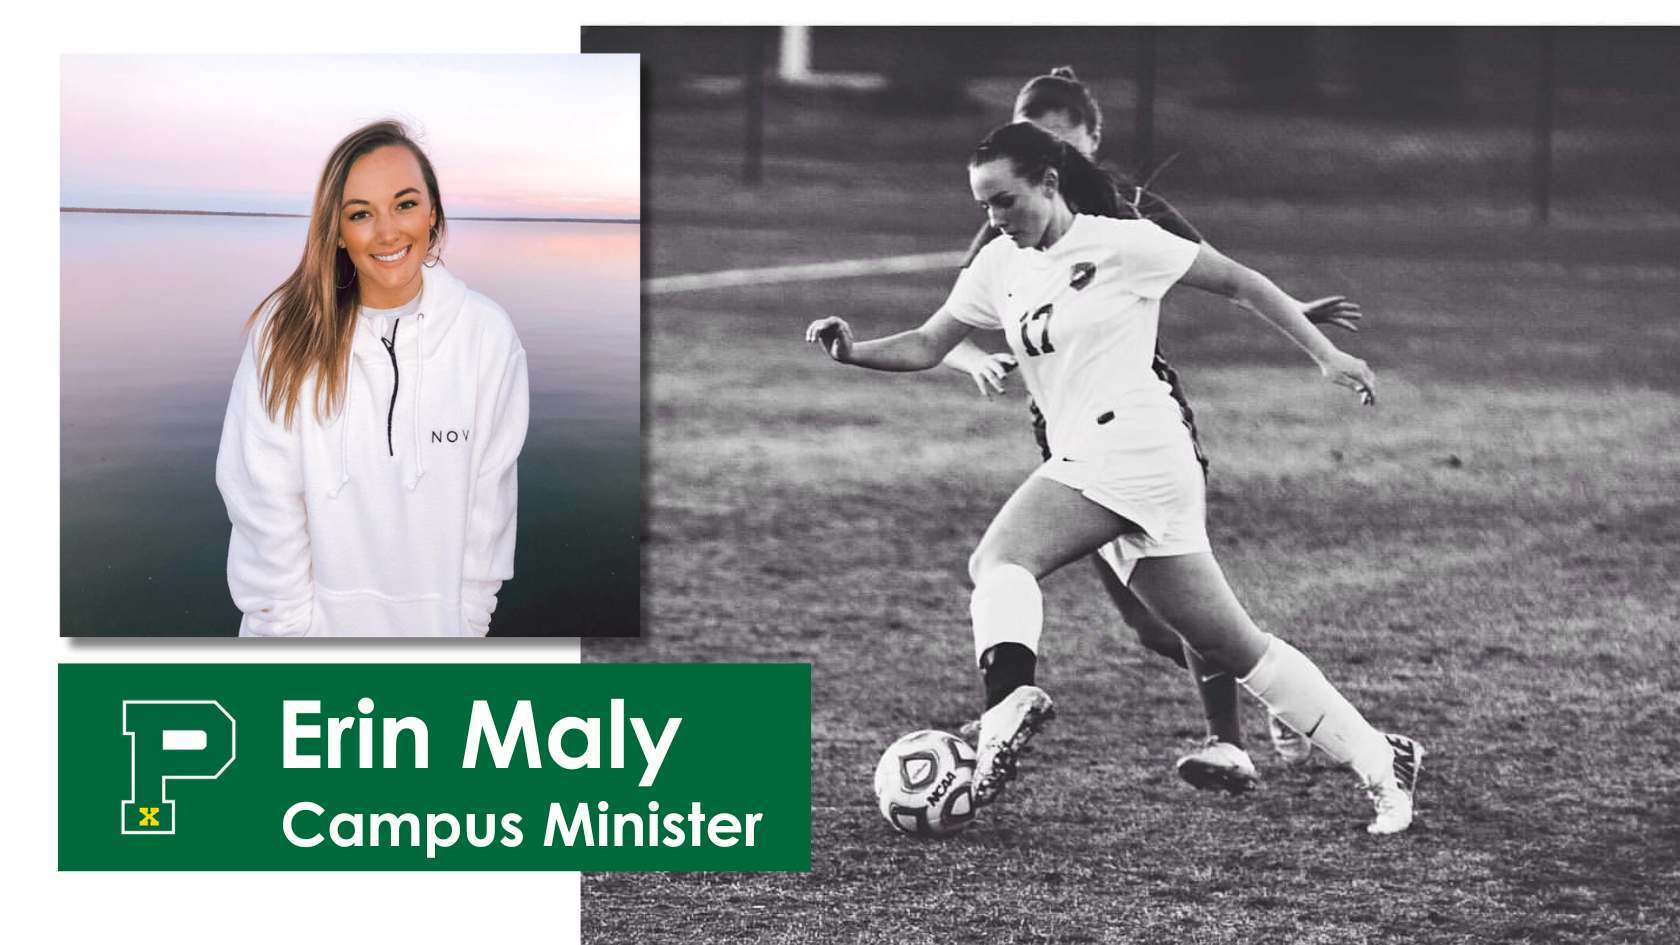 Erinn Maly on athletics and suffering and how they led her to Jesus